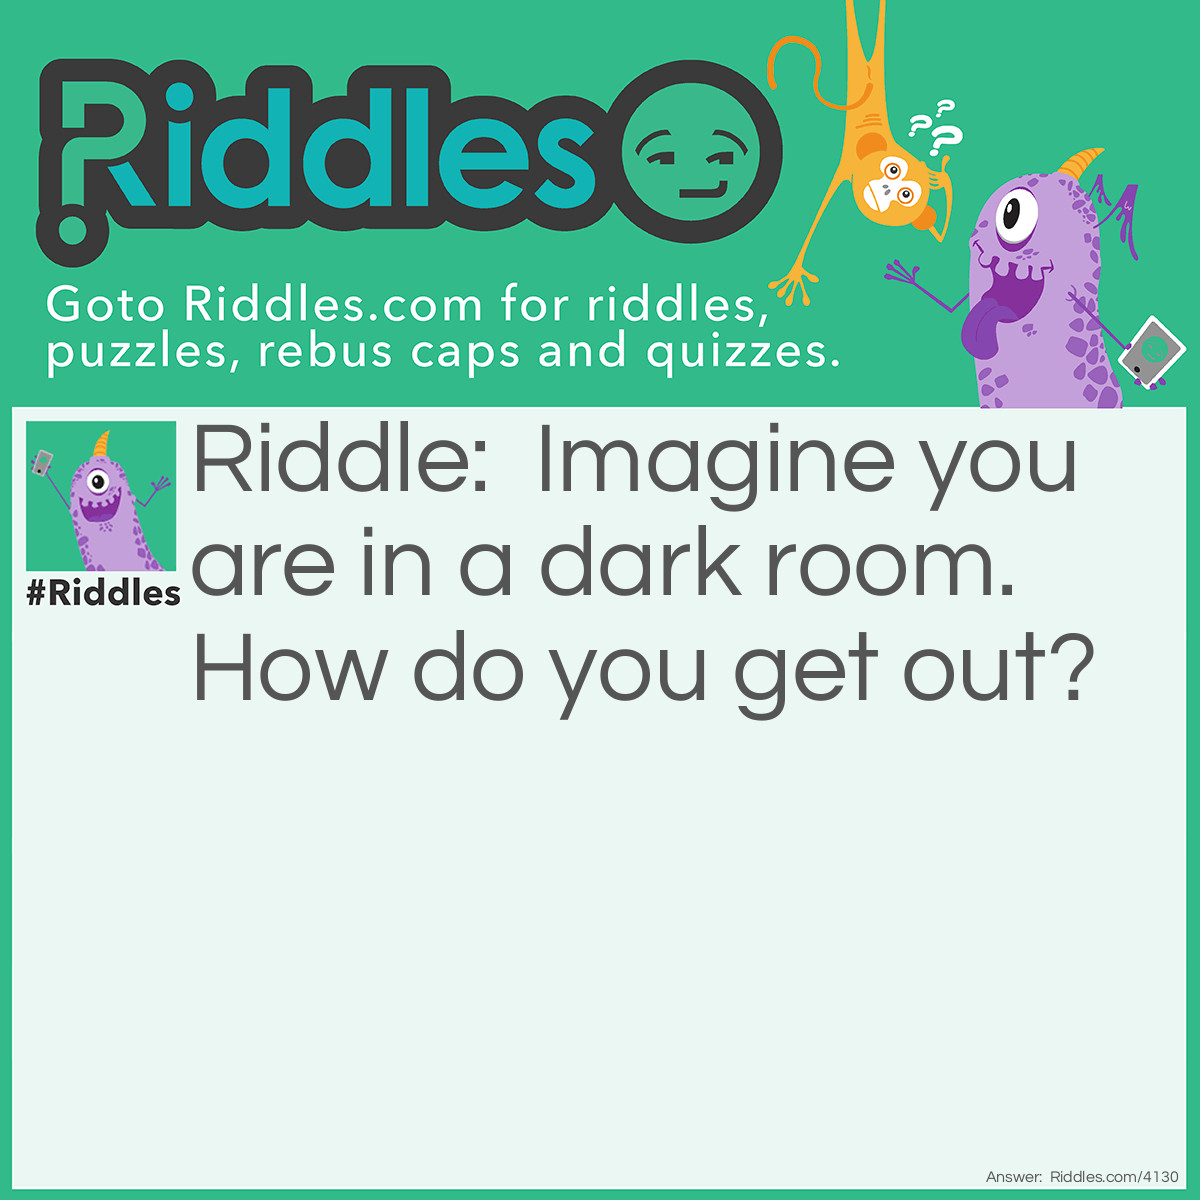 Riddle: Imagine you are in a dark room. How do you get out? Answer: Stop Imagining!  haha  got you